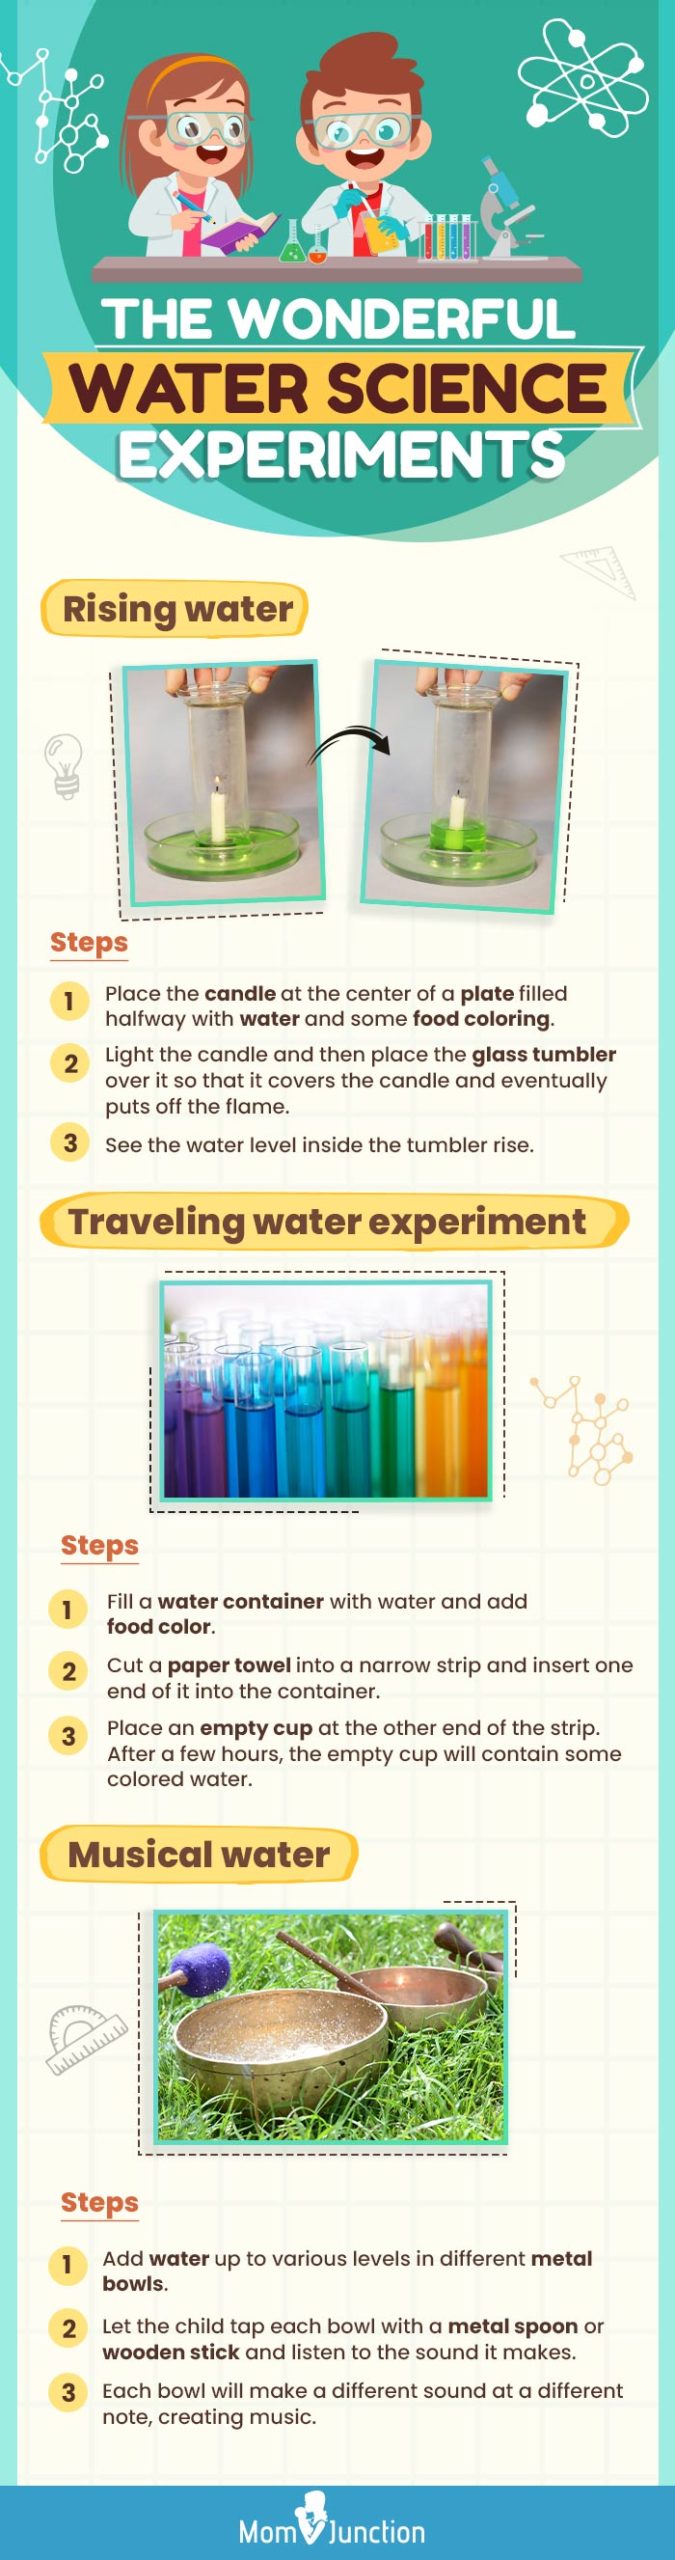 science experiments using water for kids (infographic)